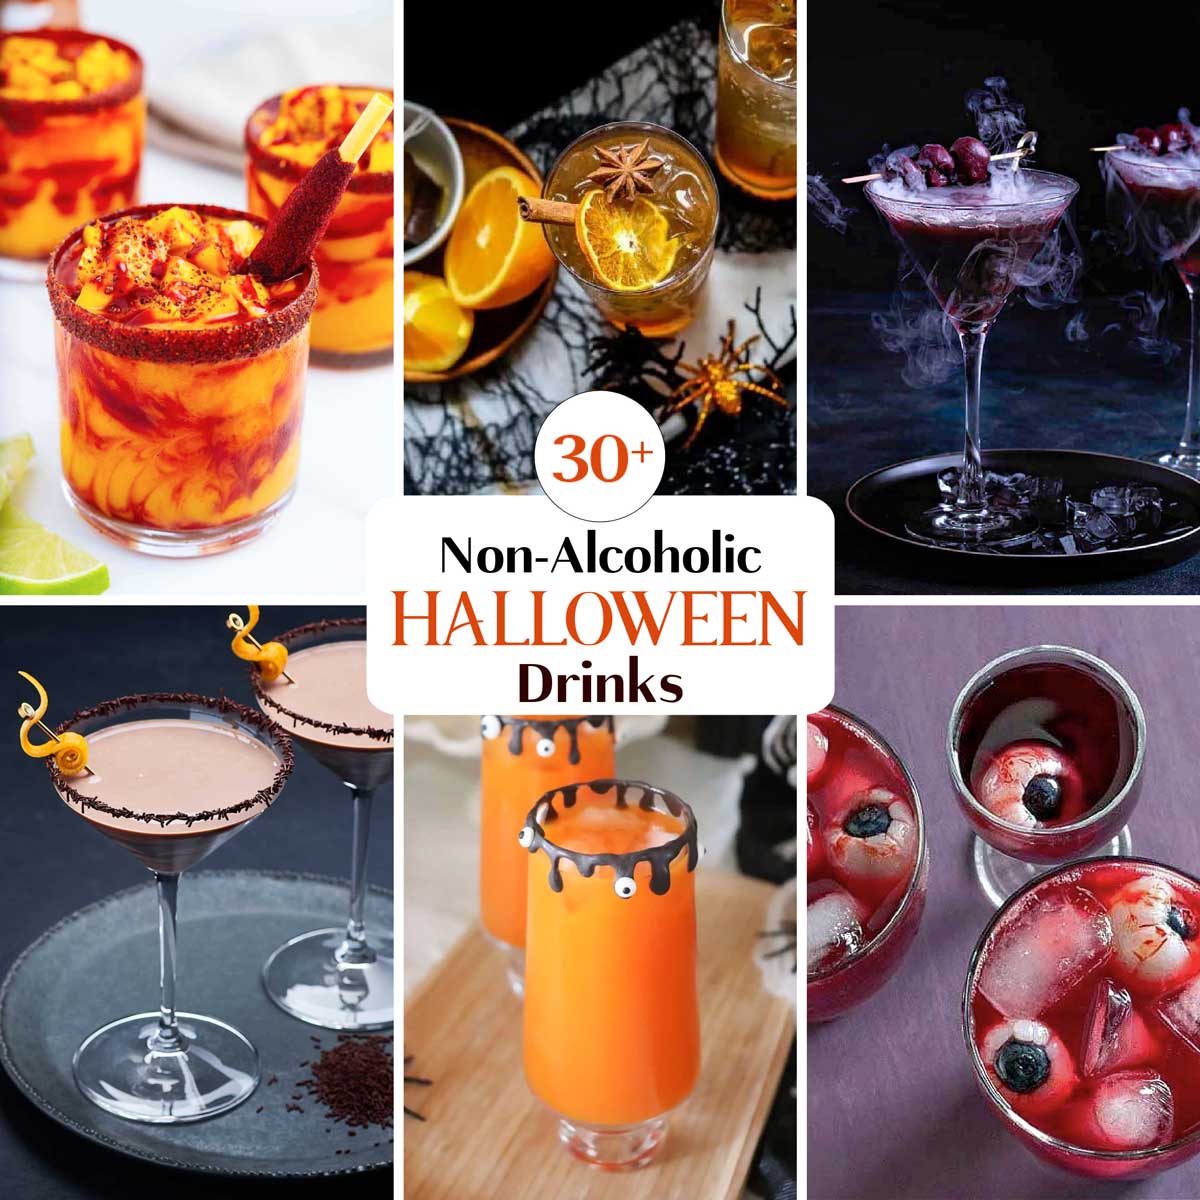 Square collage of 6 recipe photos with text overlay "30+ Non-Alcoholic Halloween Drinks".